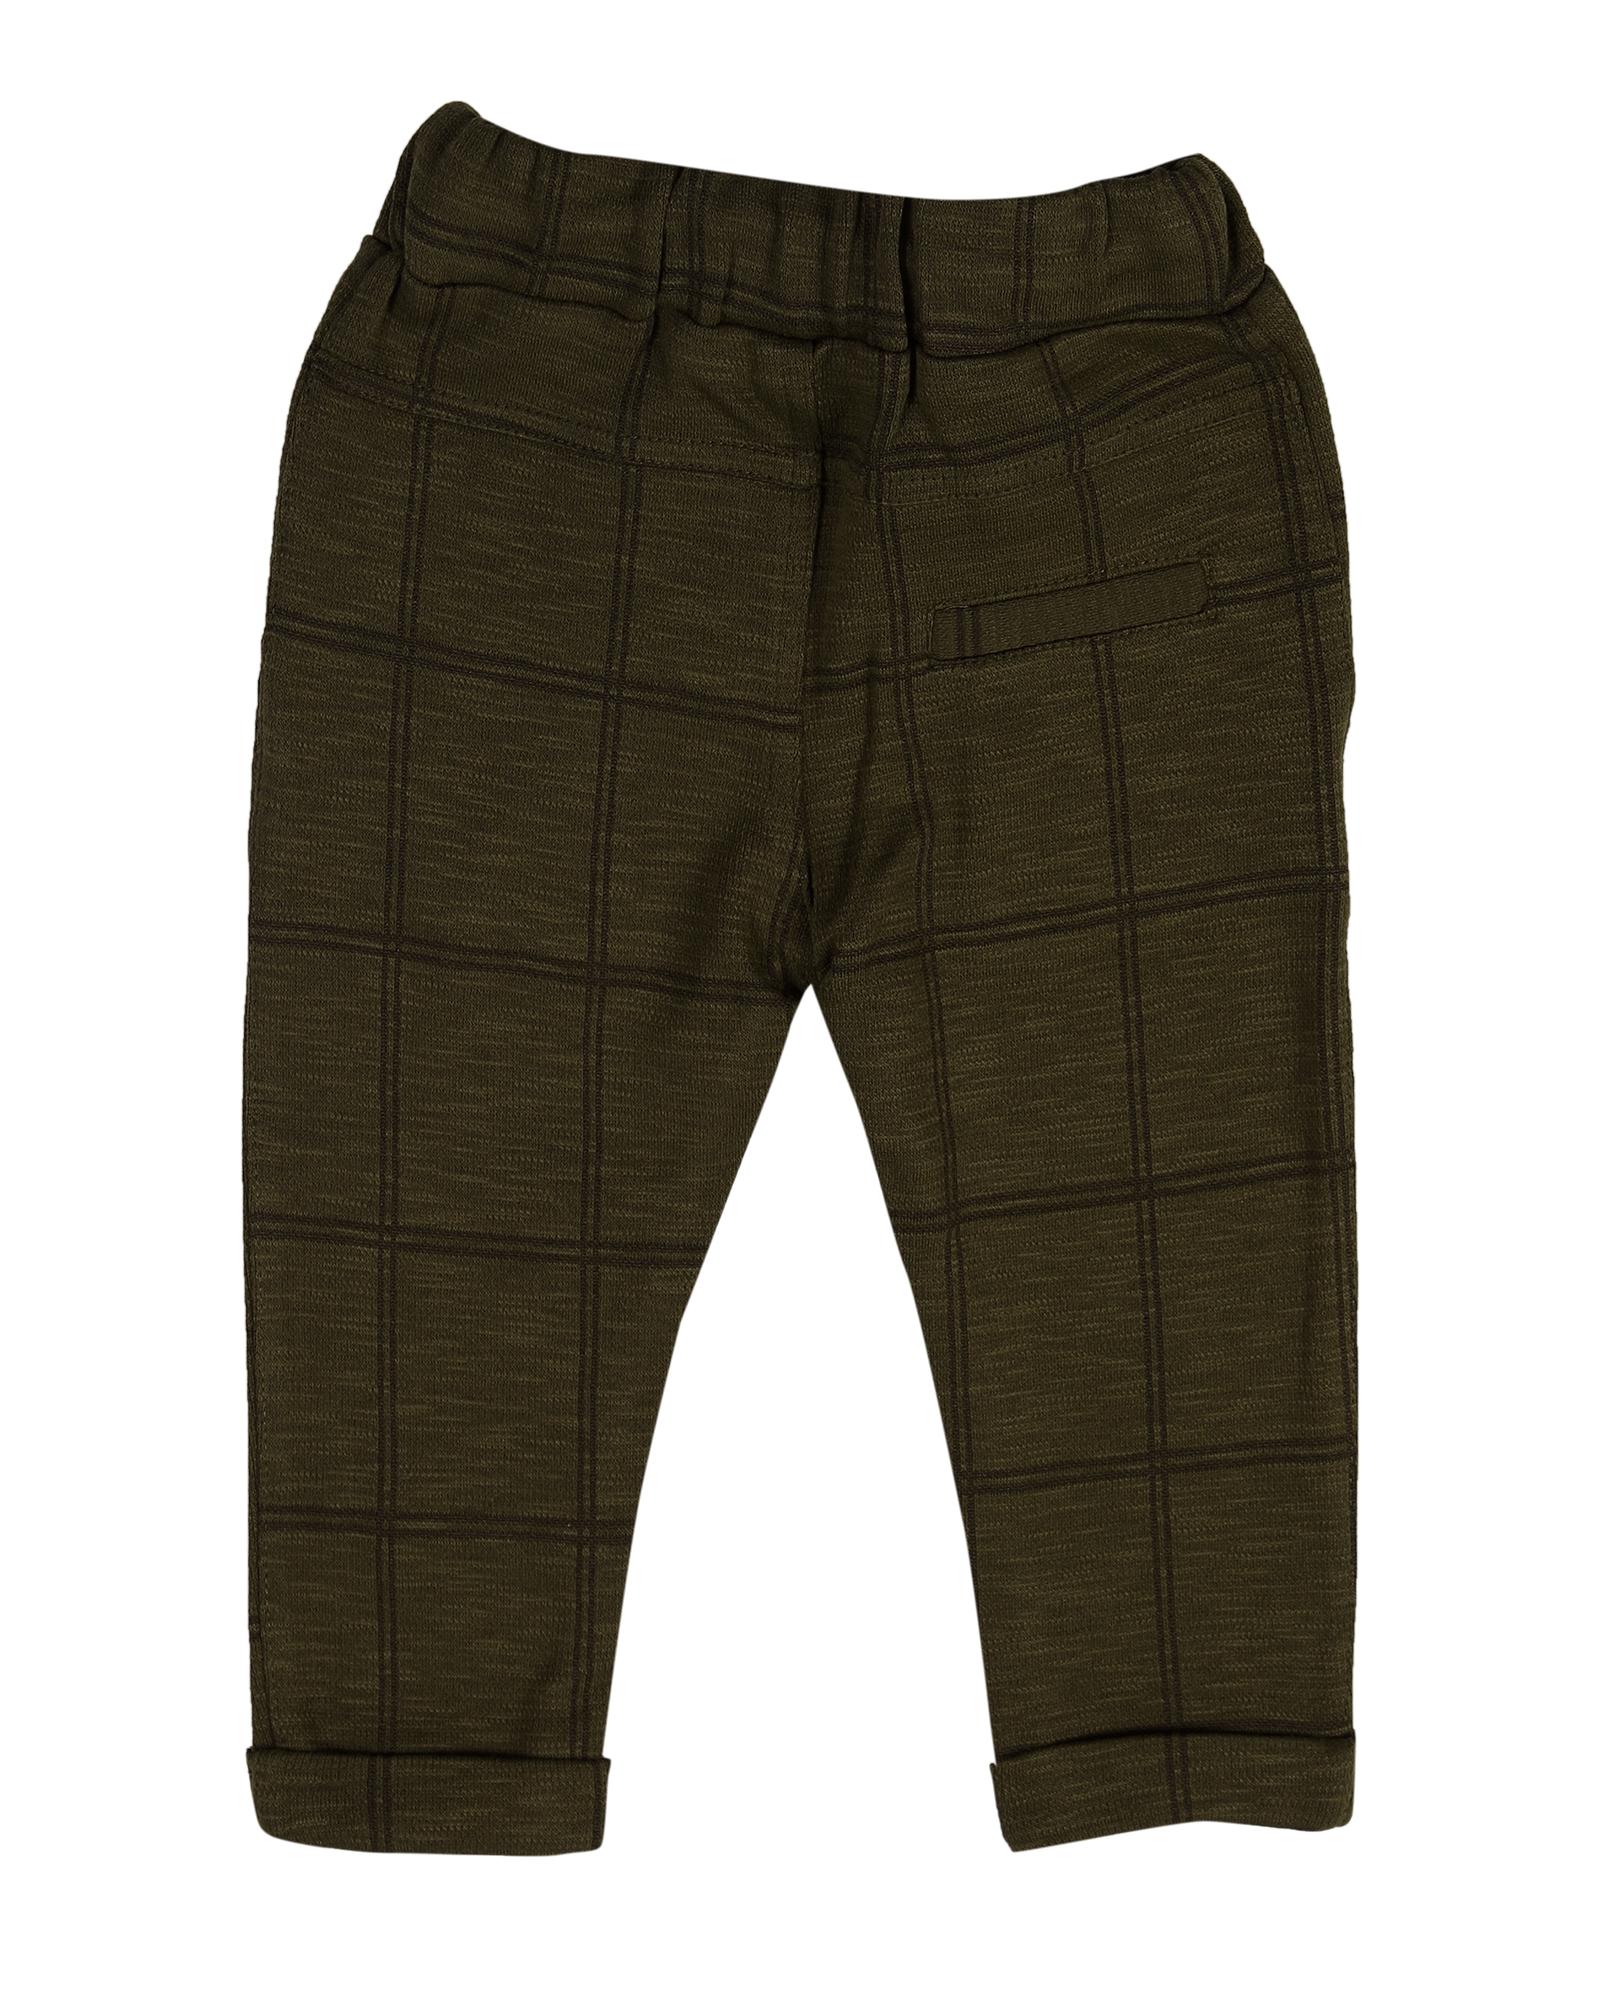 MADE IN THE SHADE Slim Fit Boys Brown Trousers - Buy MADE IN THE SHADE Slim  Fit Boys Brown Trousers Online at Best Prices in India | Flipkart.com